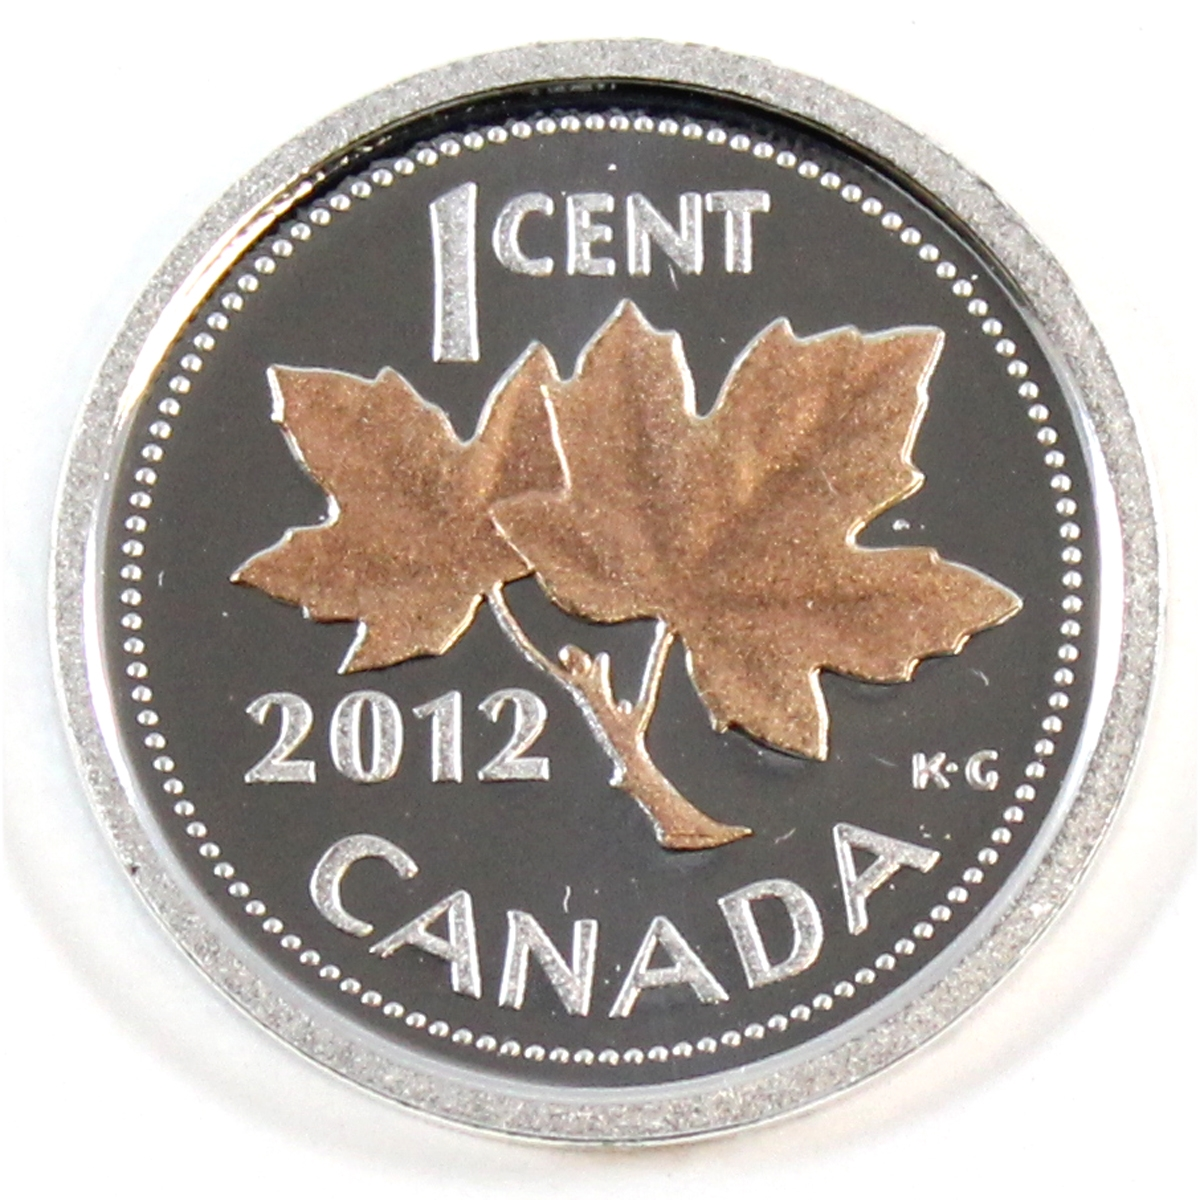 2012 Canadian 1-cent coin